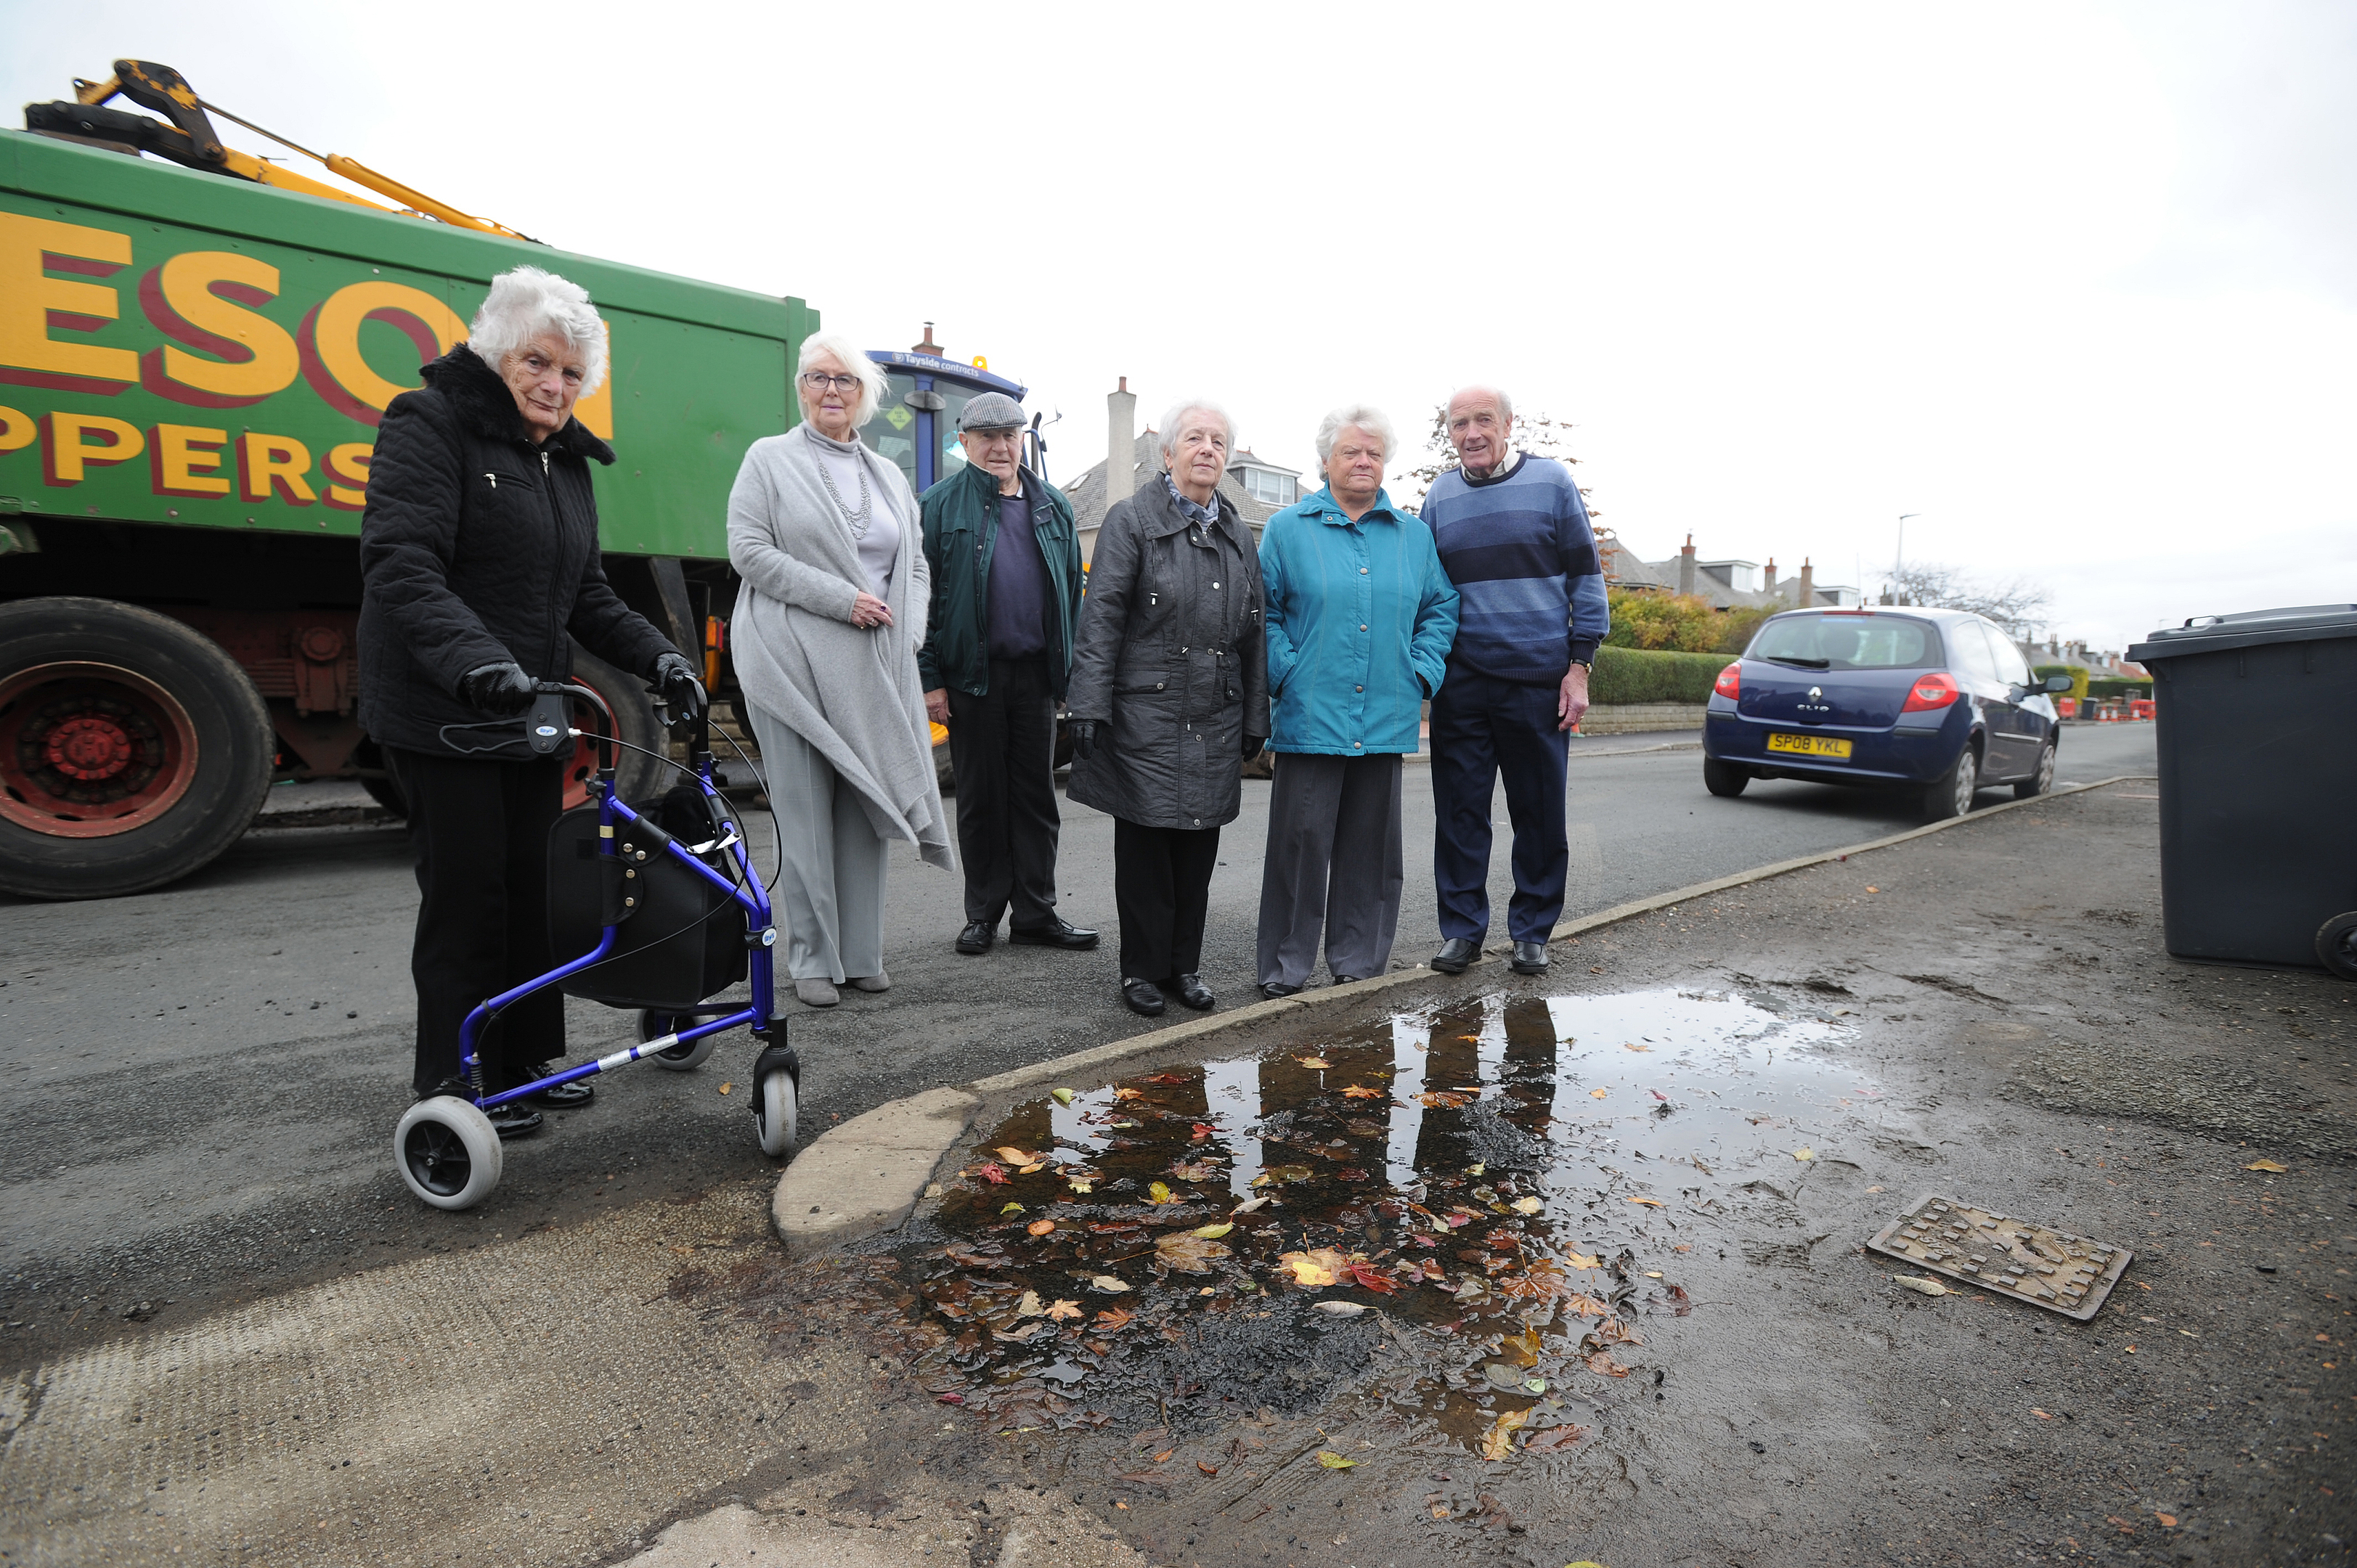 Nesbitt Street residents have signed a petition to get the council to pave one side of the road that has been in a state of disrepair for more than 20 years.